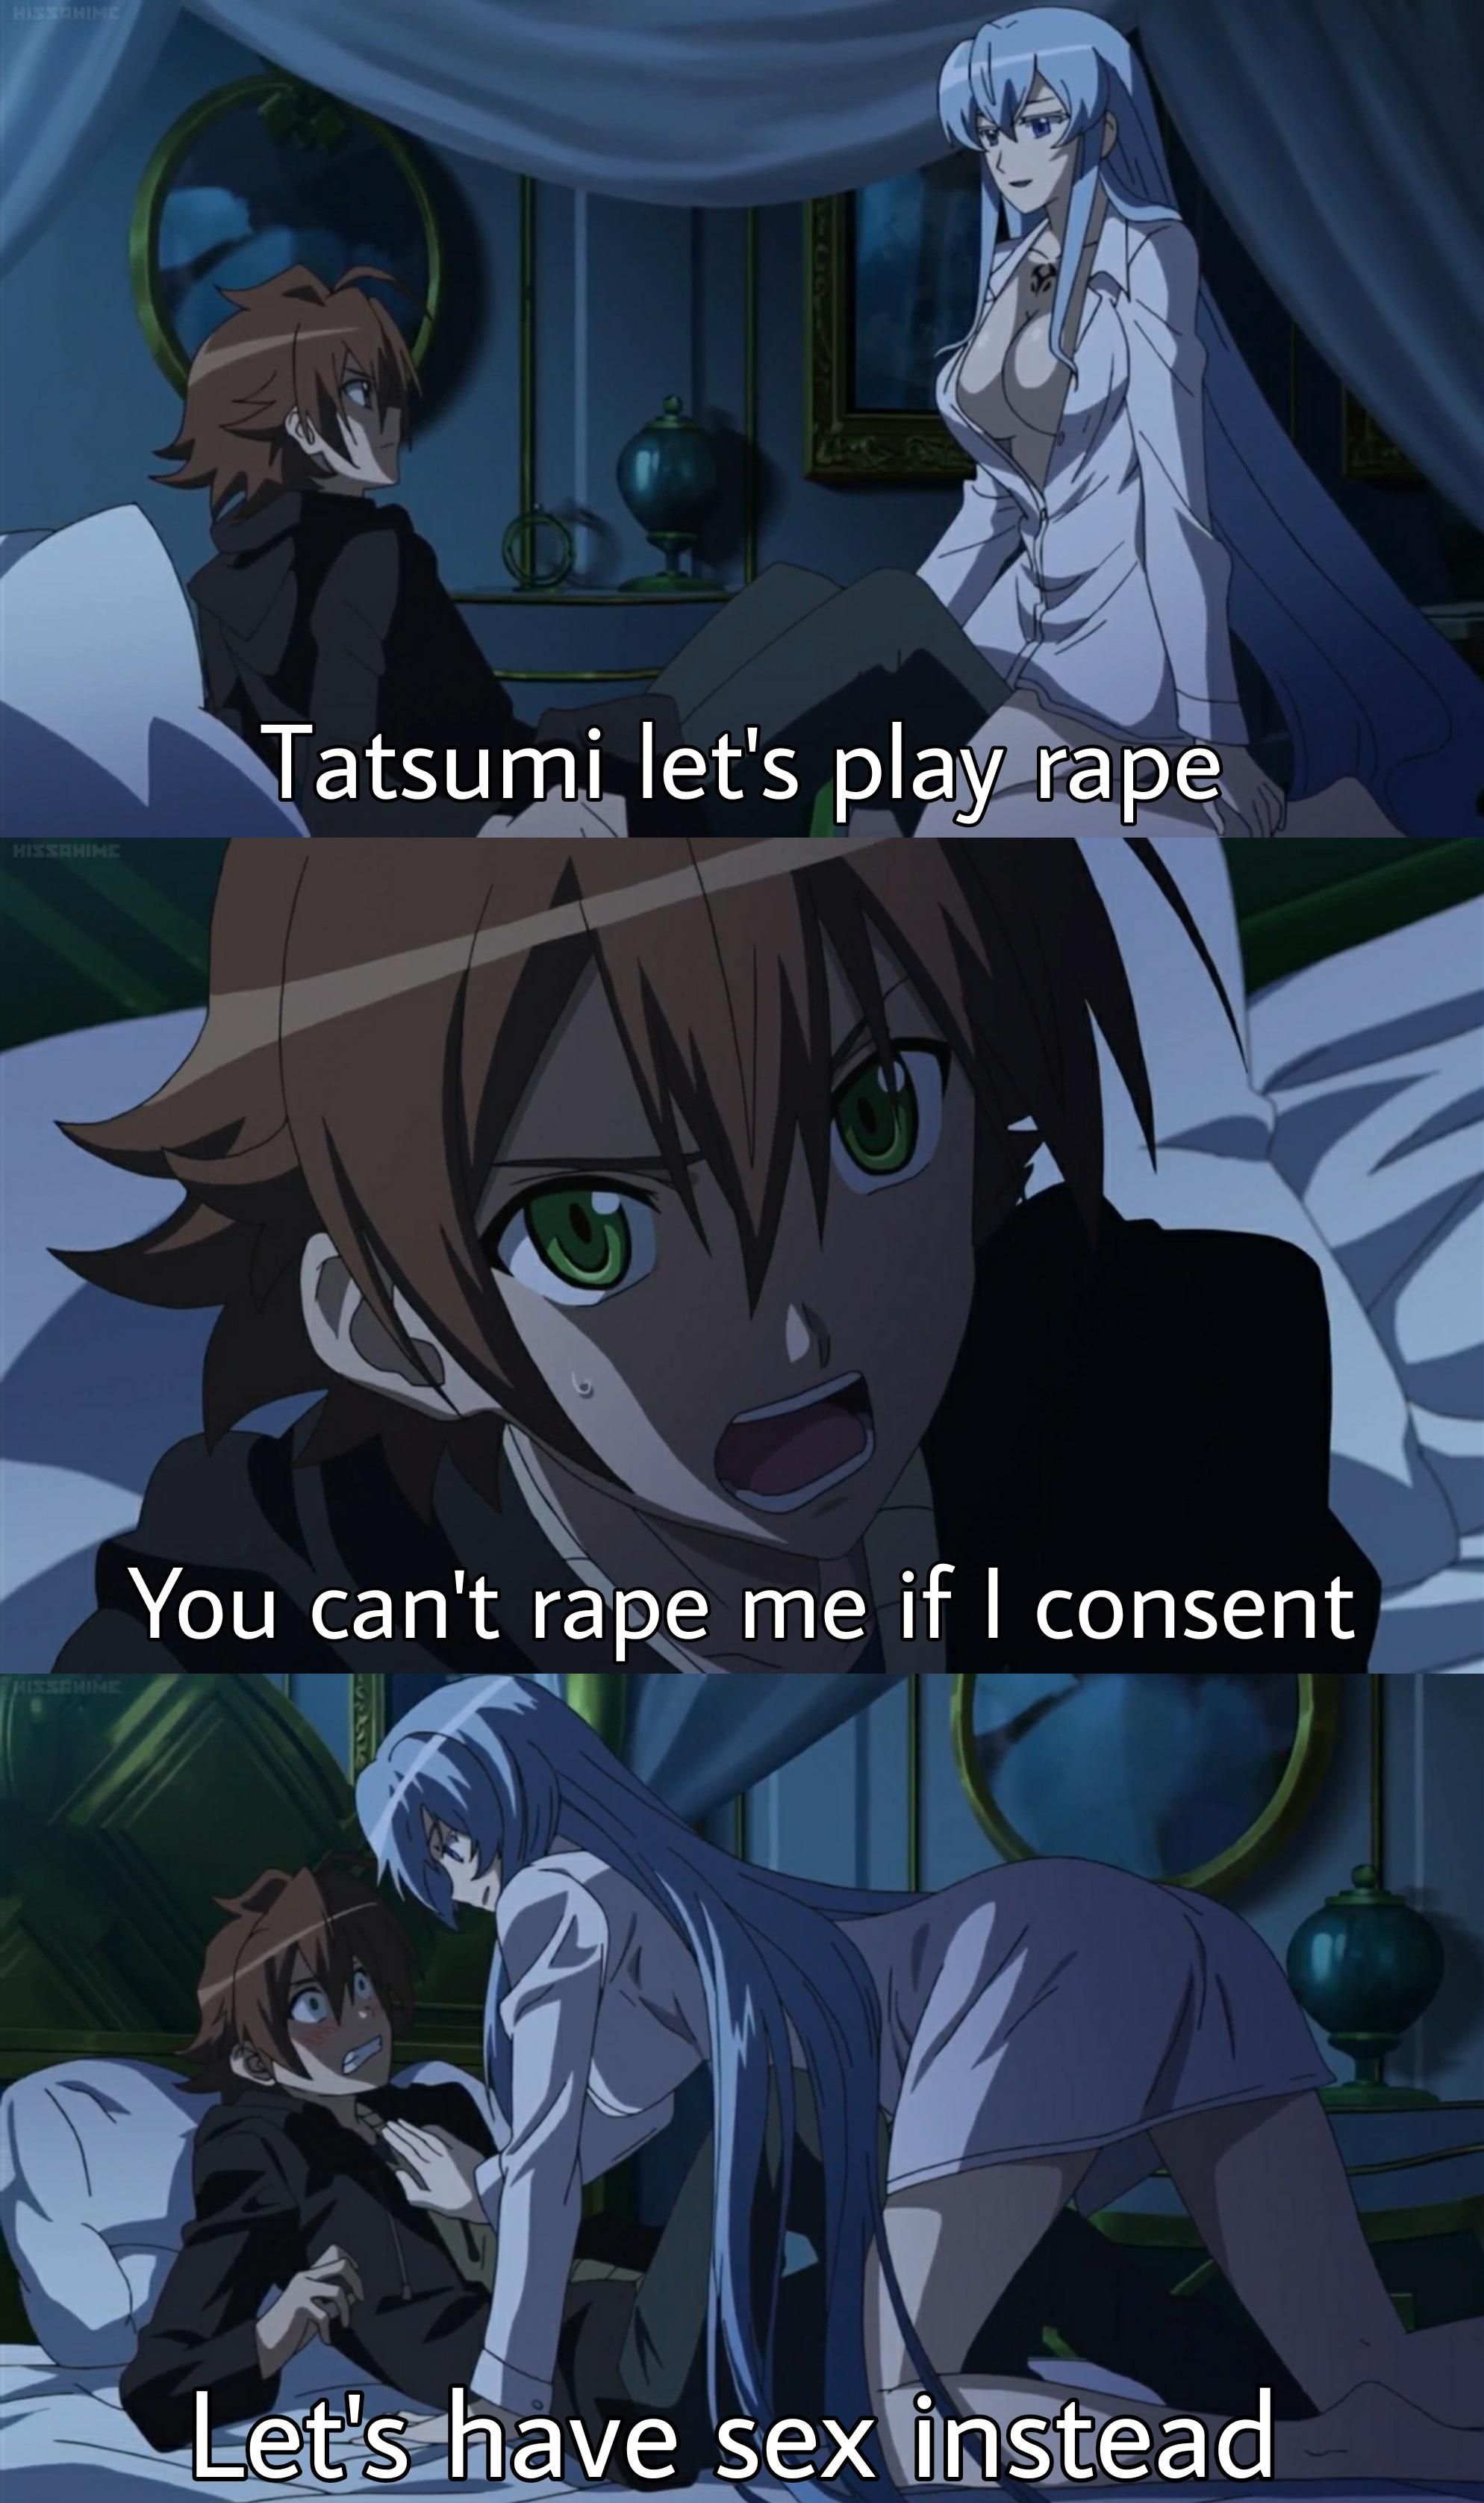 If I was in Tatsumi position